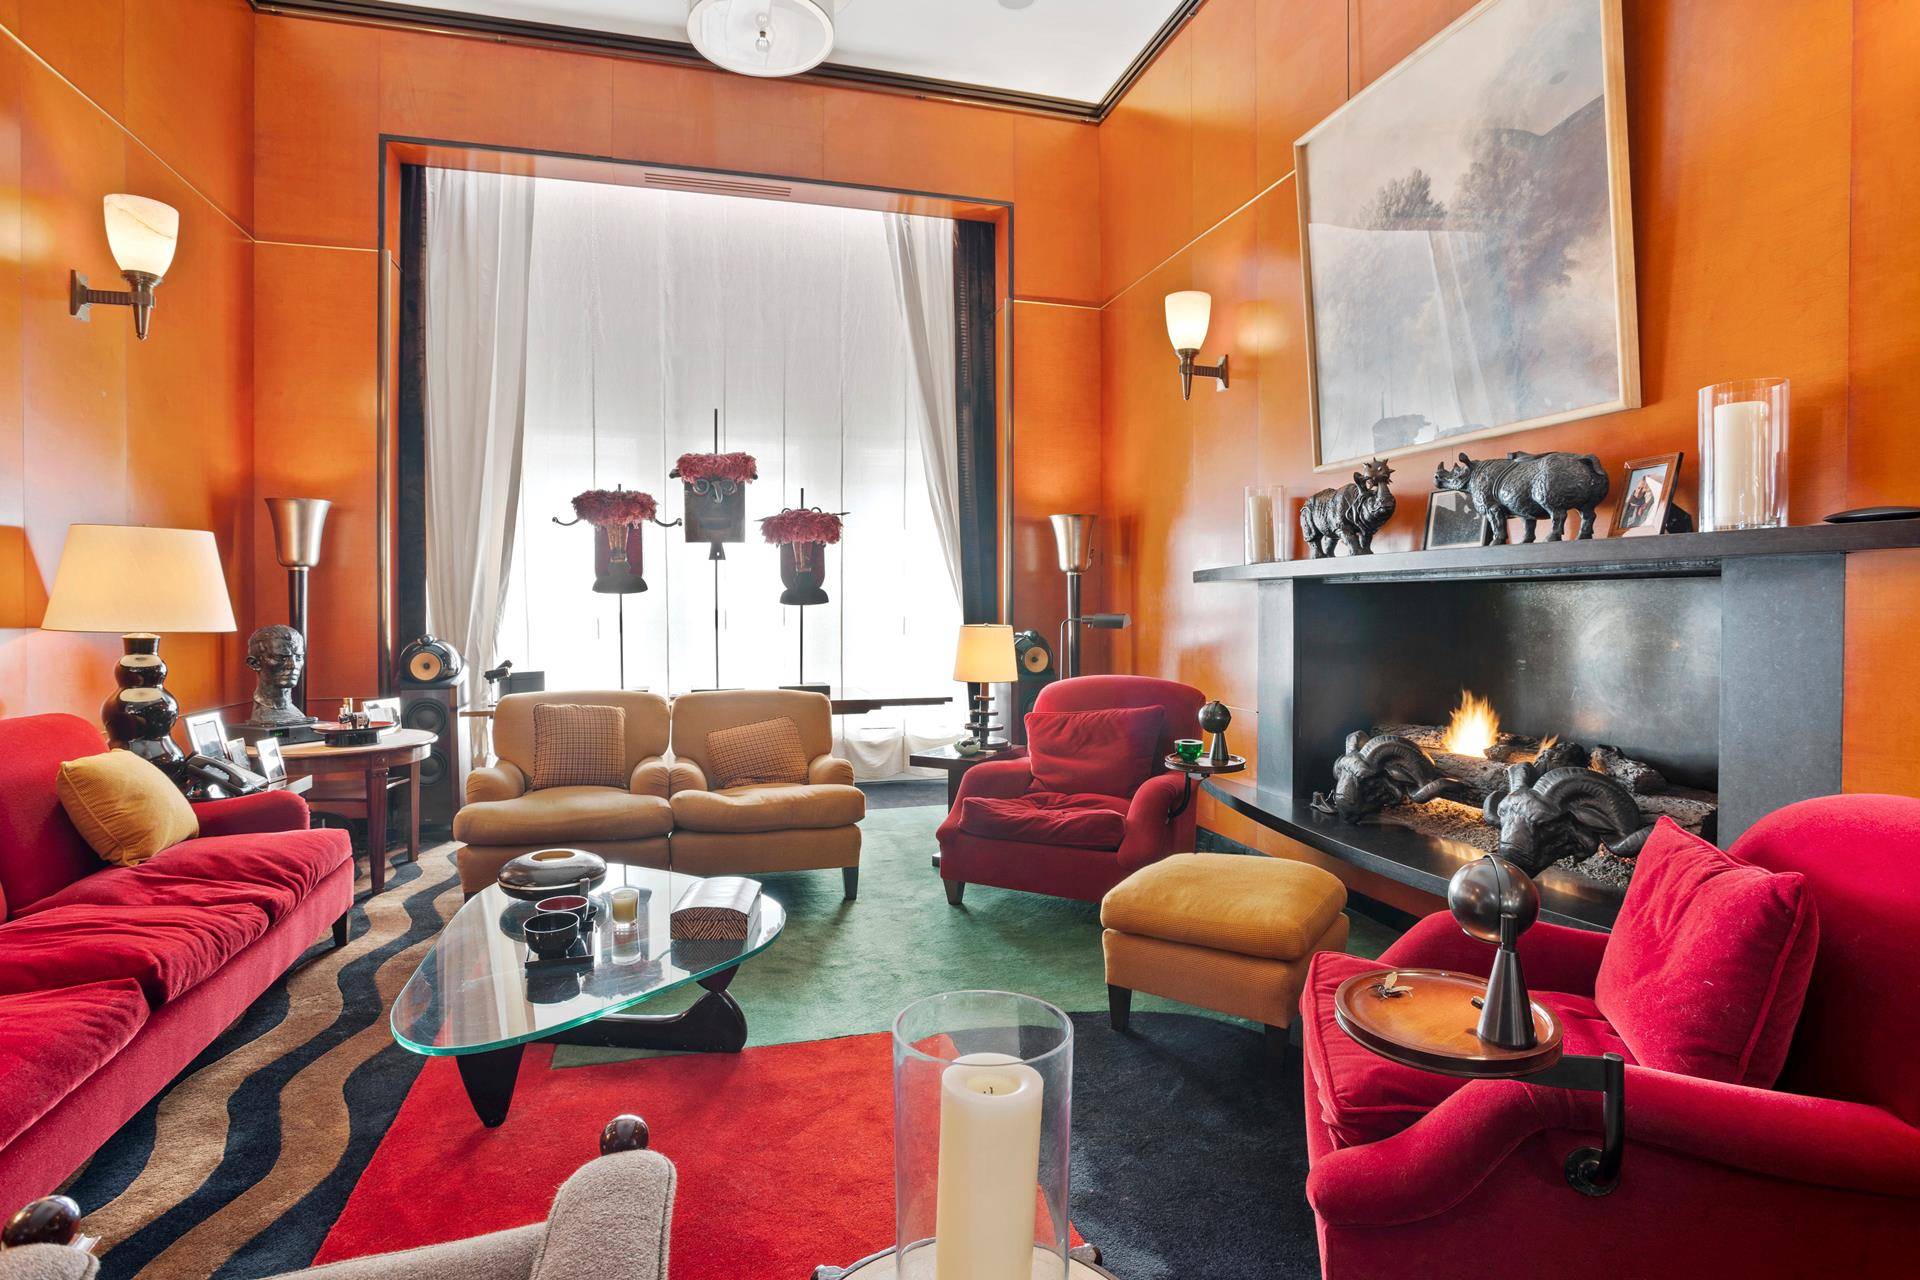 Once in a lifetime opportunity to acquire a landmark Tribeca Mansion restored by world famous designer !